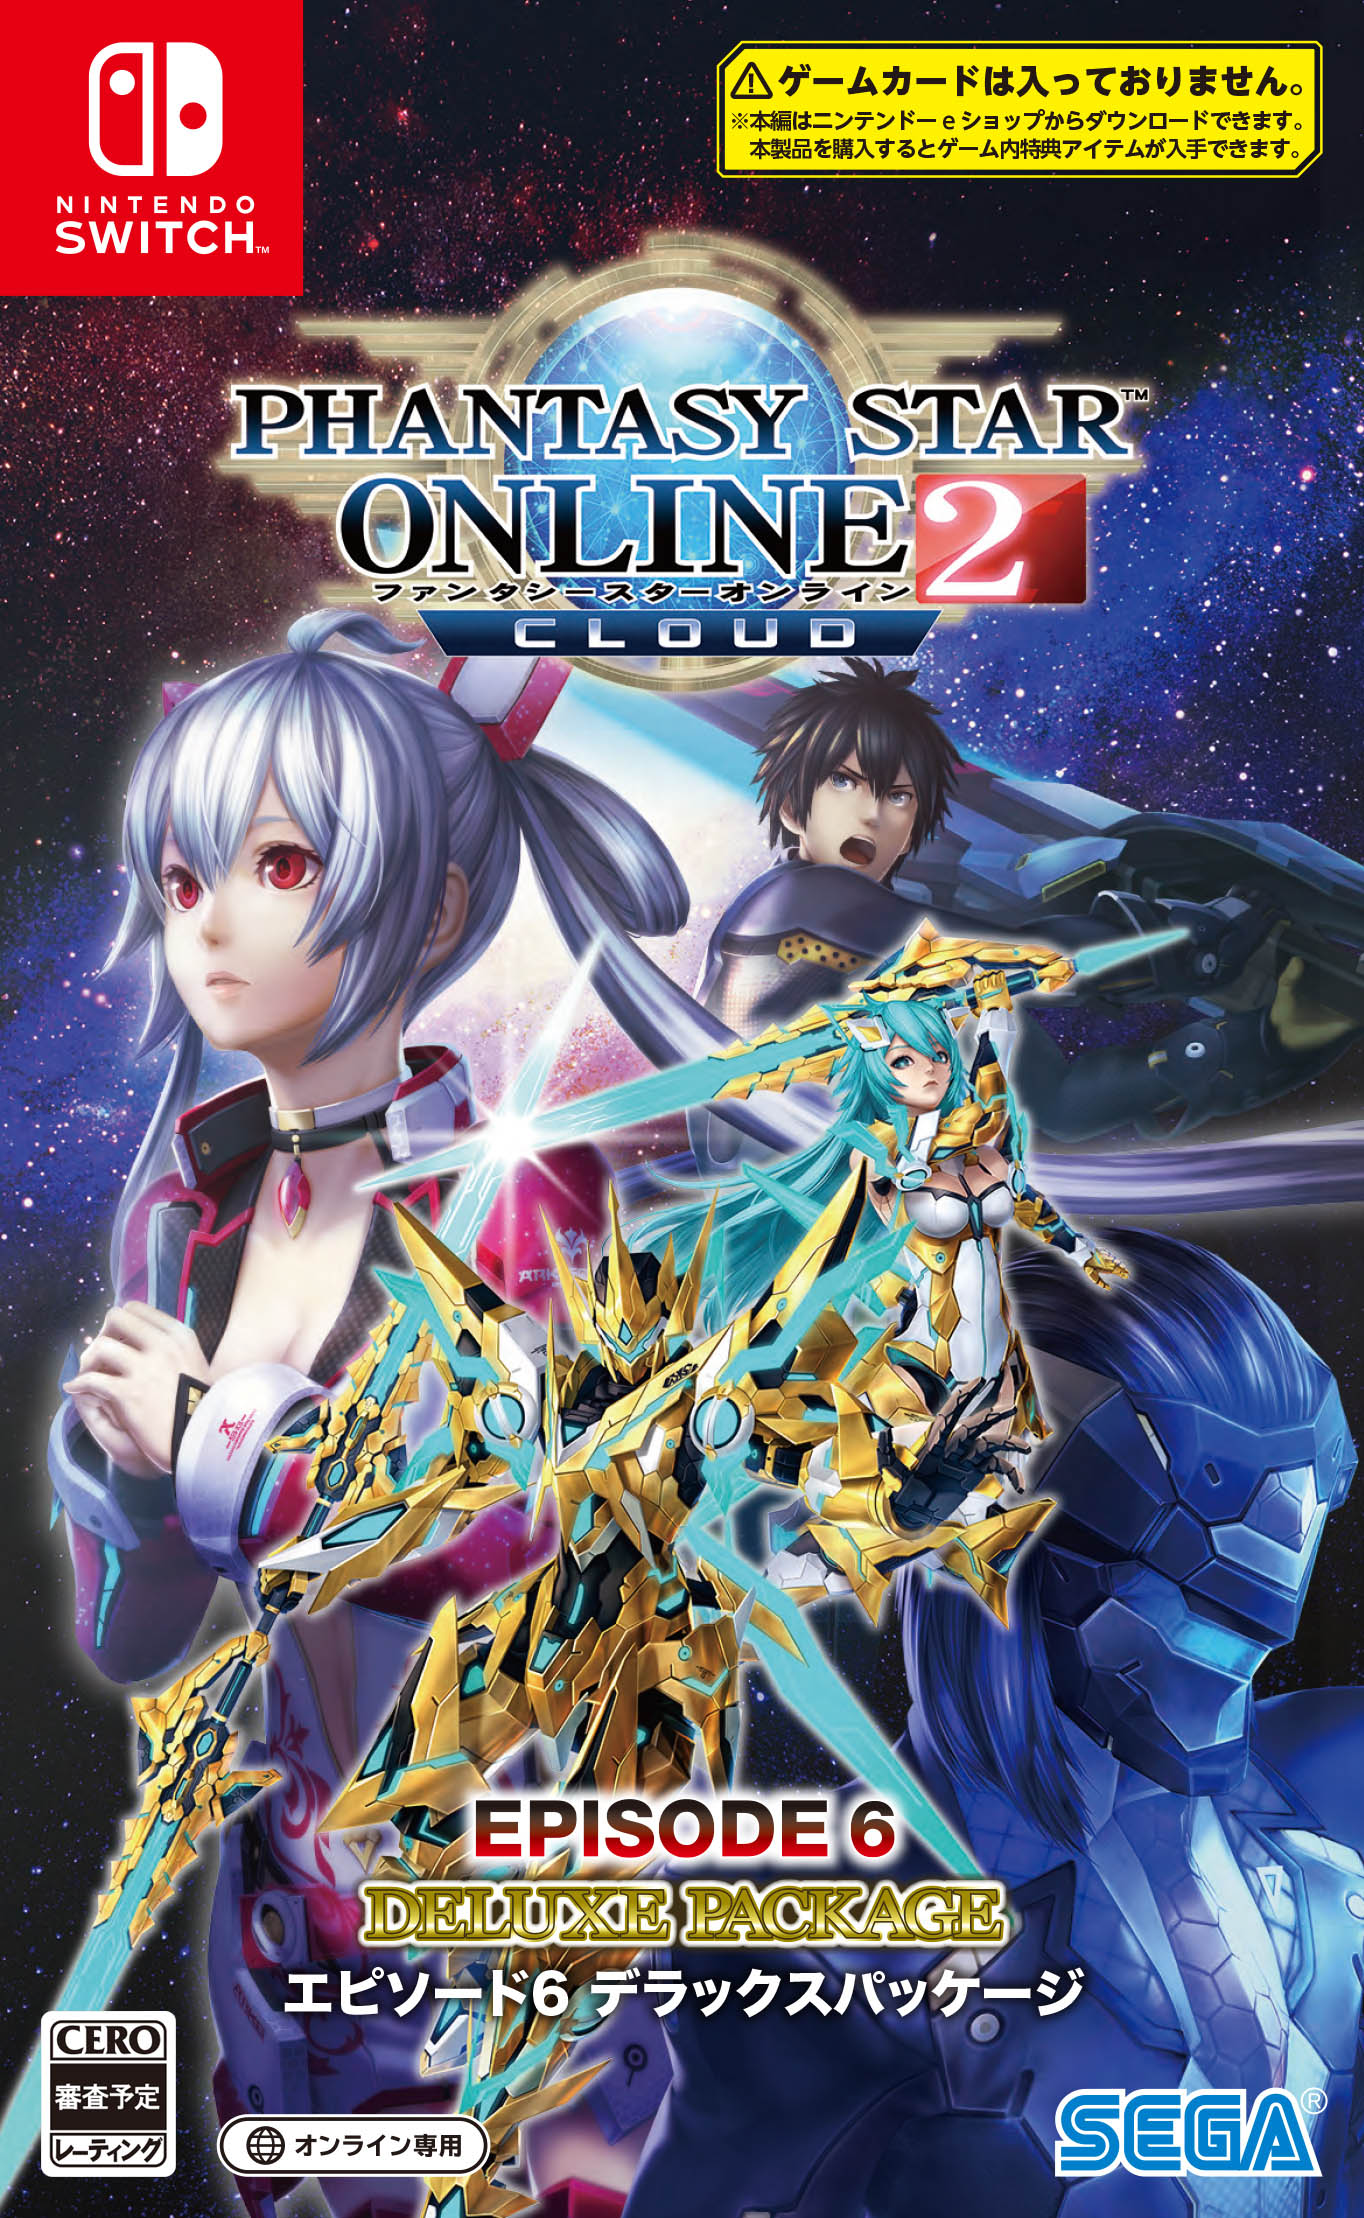 Phantasy Star Online 2 Episode 6 Deluxe Package for PS4, Switch, and